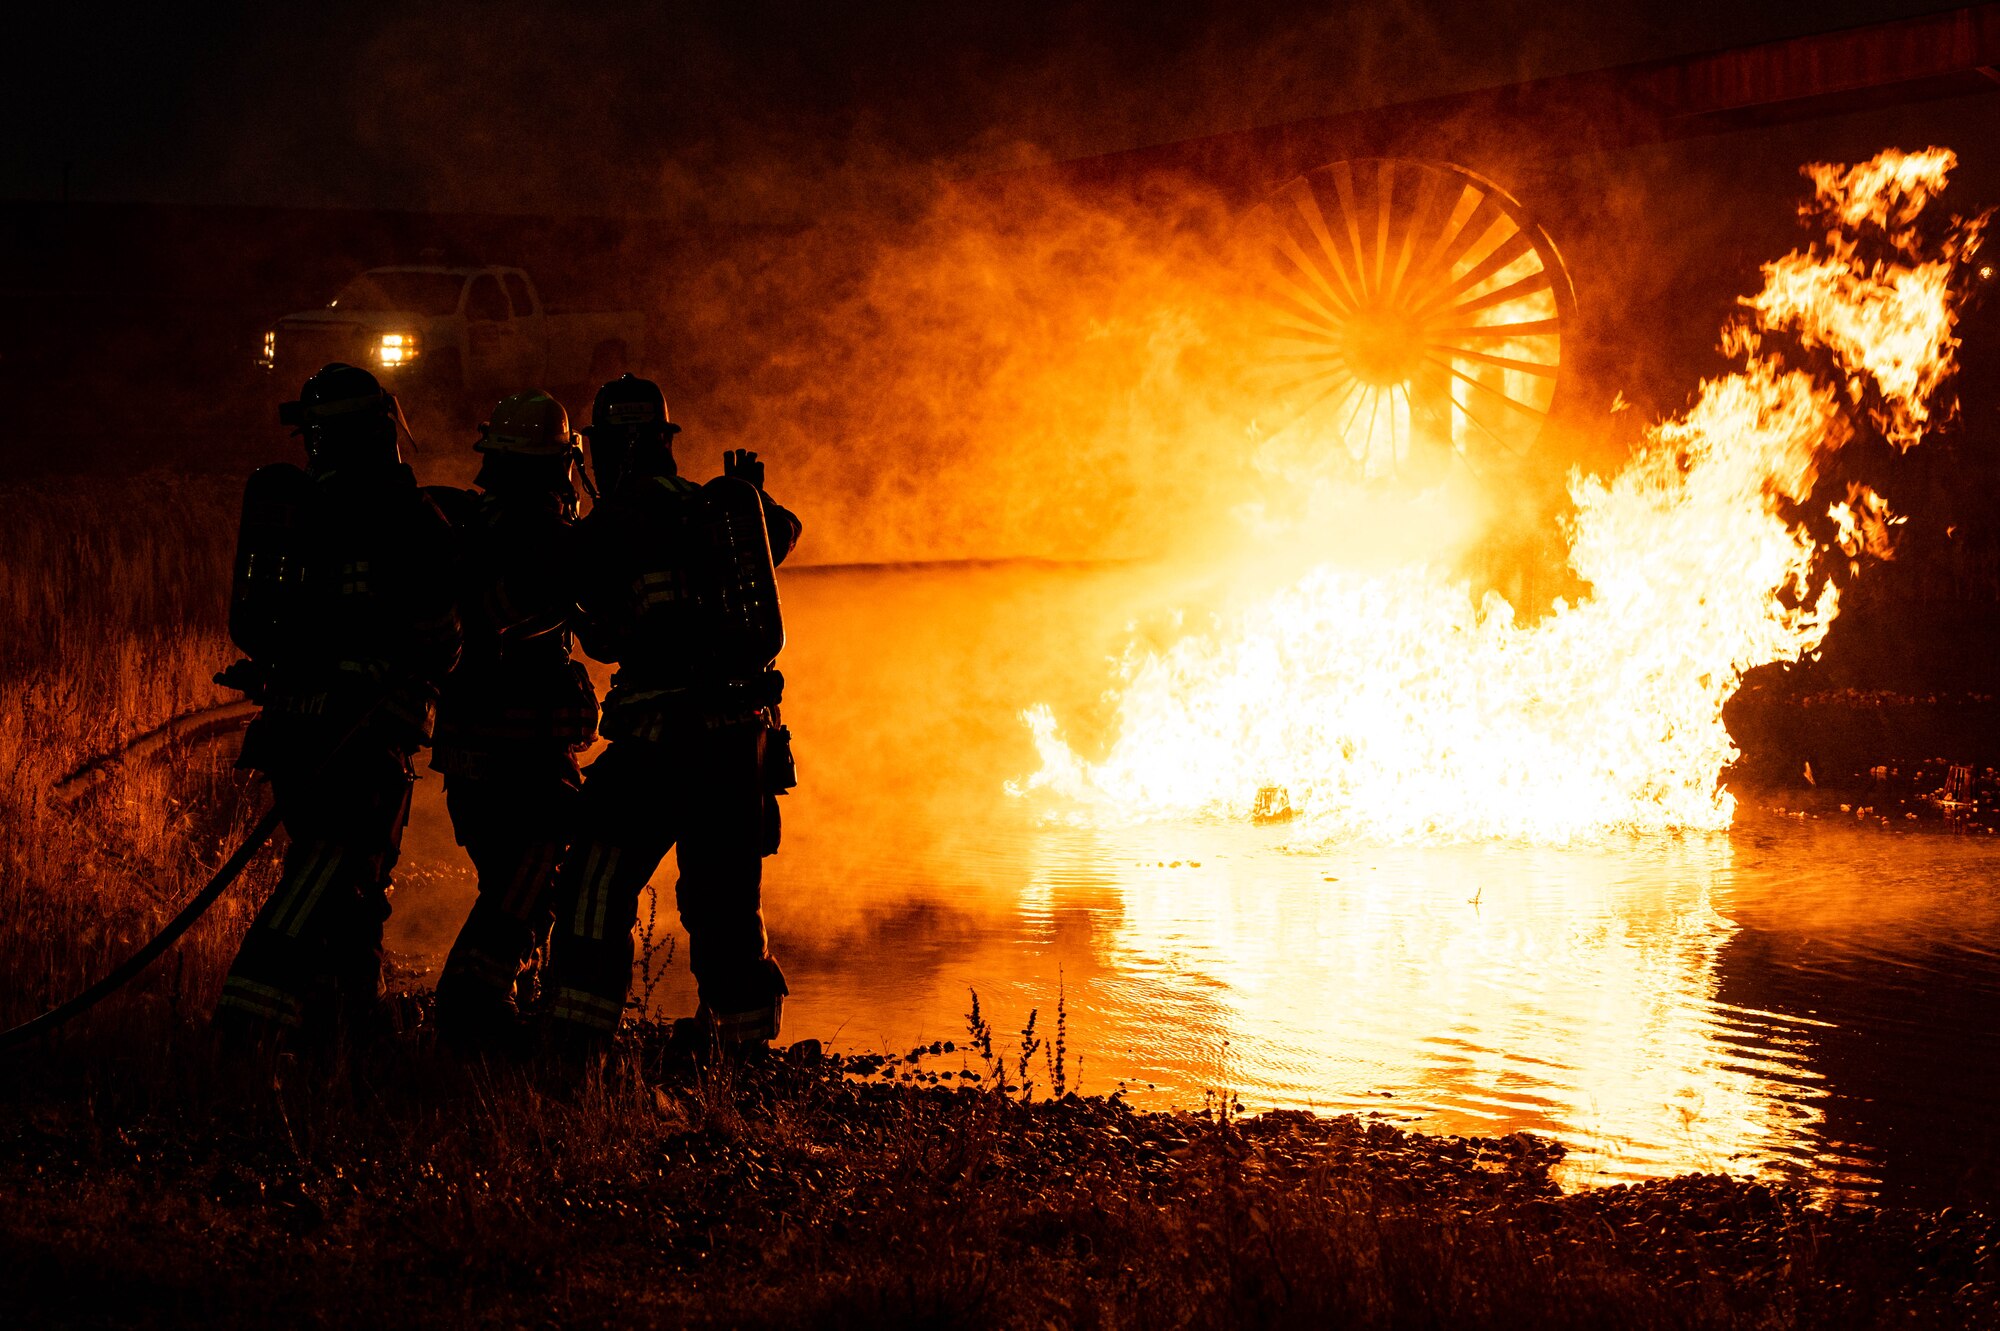 A group of 5th Civil Engineer Squadron fire protection specialists extinguish an ongoing fire during a live jet fire exercise Minot Air Force Base, North Dakota, Aug. 21, 2023. Fire Protection specialists can deal with everything from brush fires to burning rocket fuel and hazardous material fires, which makes frequent training a necessity. (U.S. Air Force photo by Airman 1st Class Alexander Nottingham)